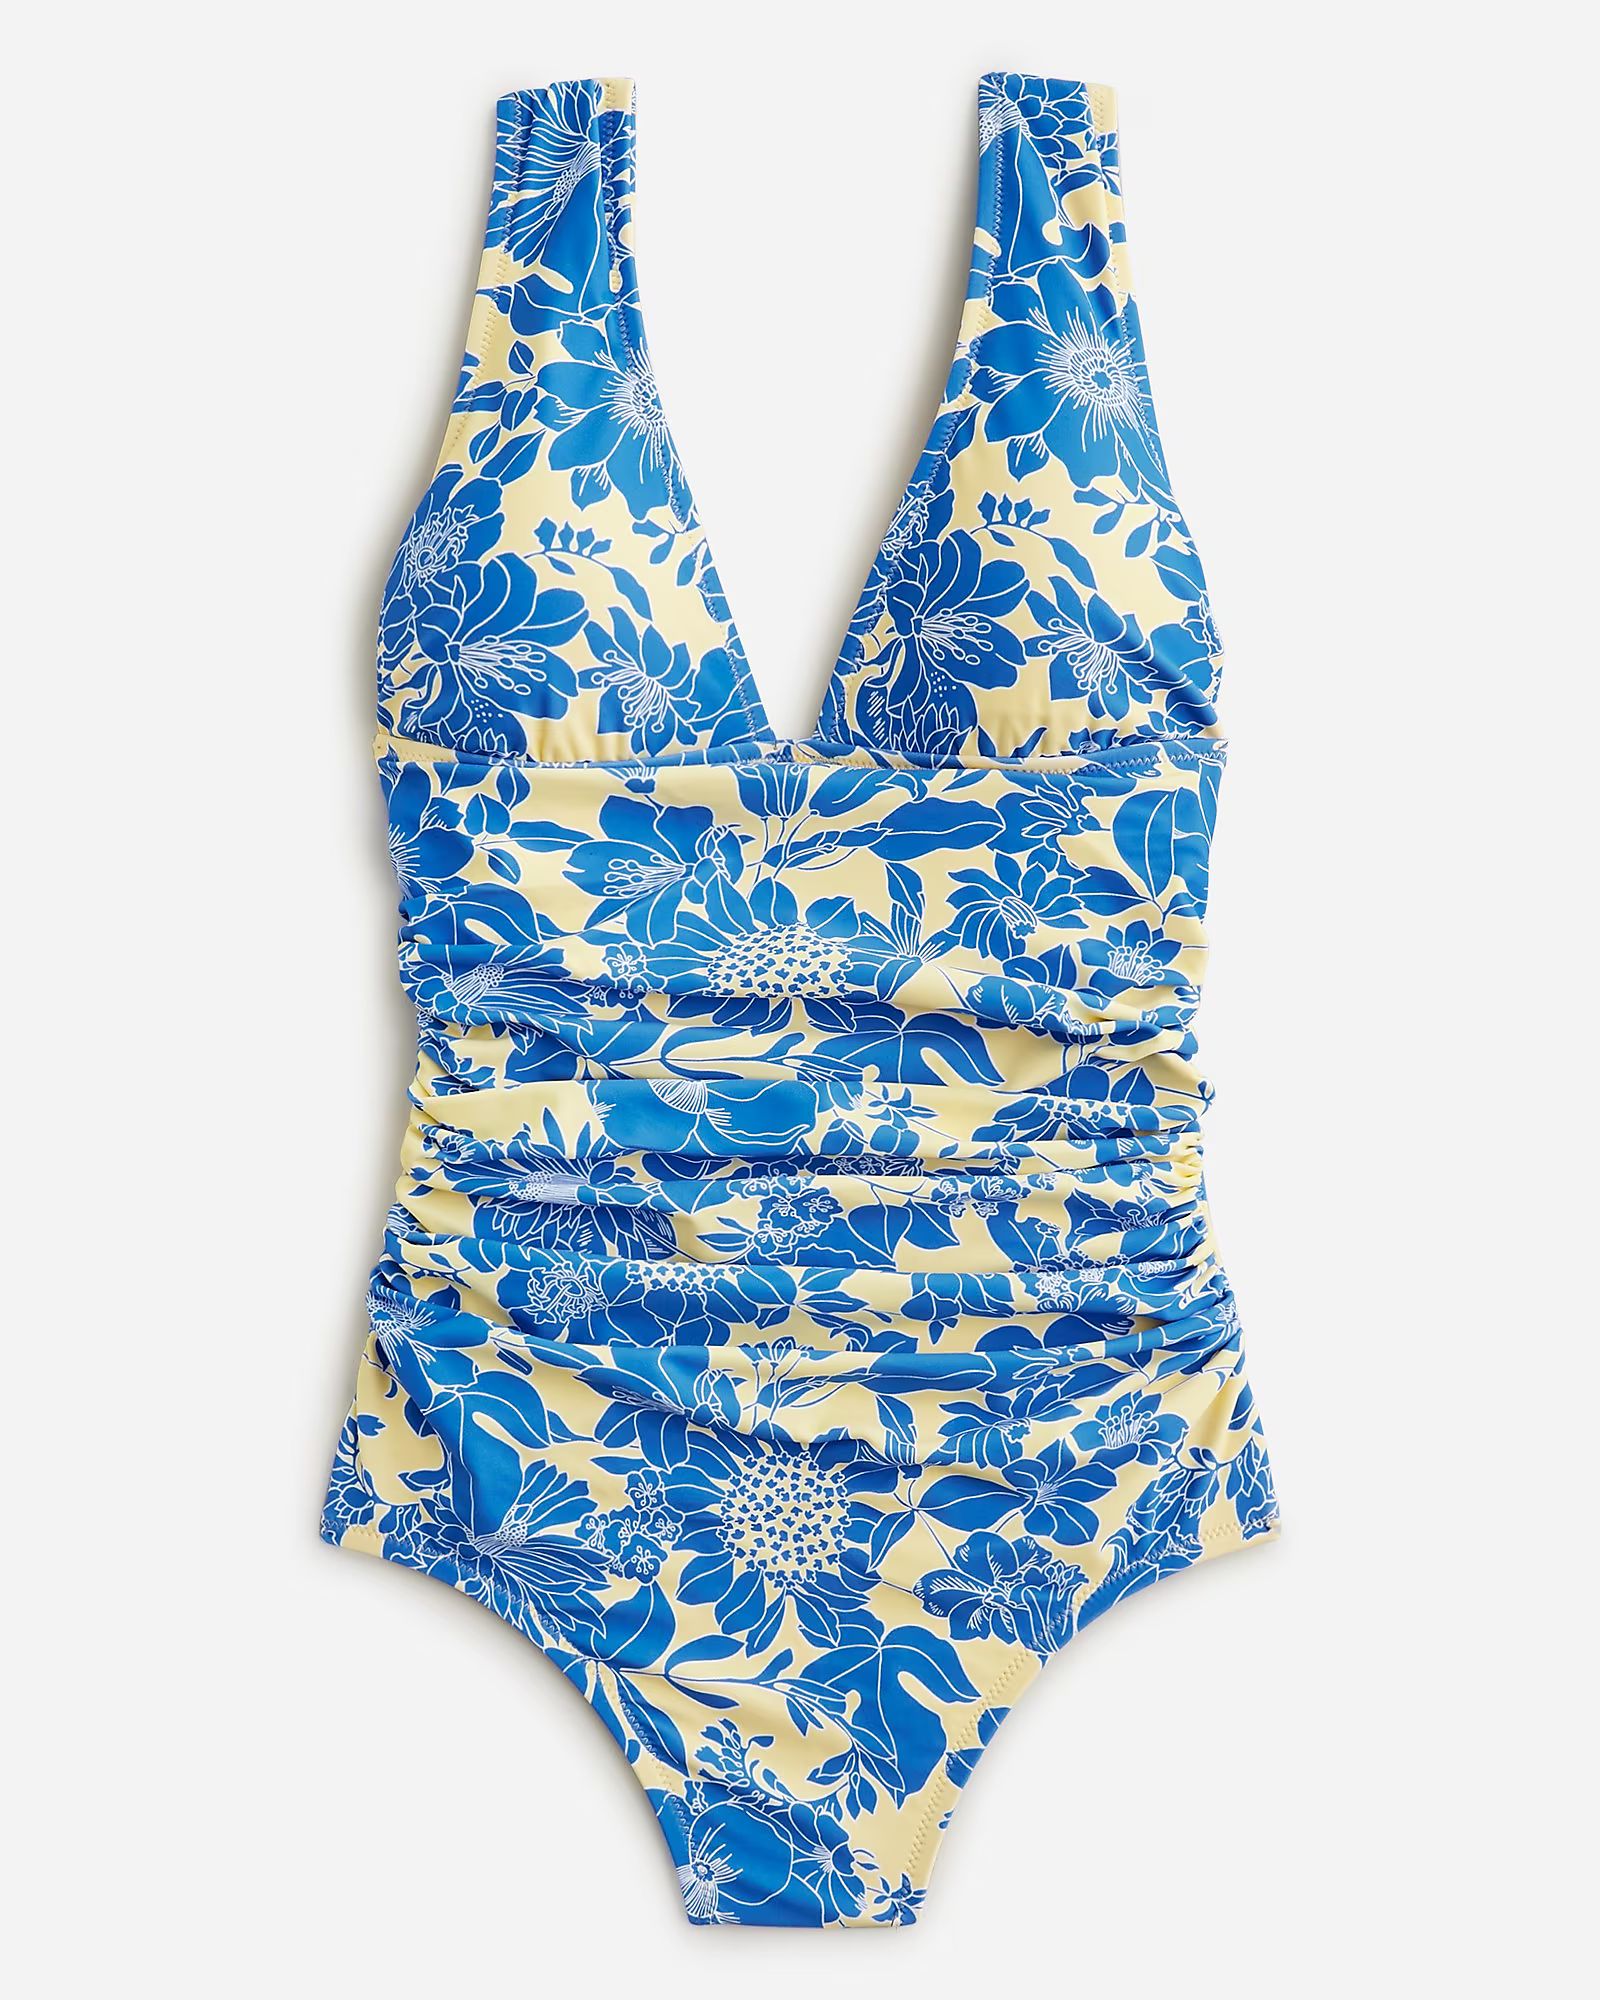 Ruched femme one-piece full-coverage swimsuit in blue floral | J.Crew US